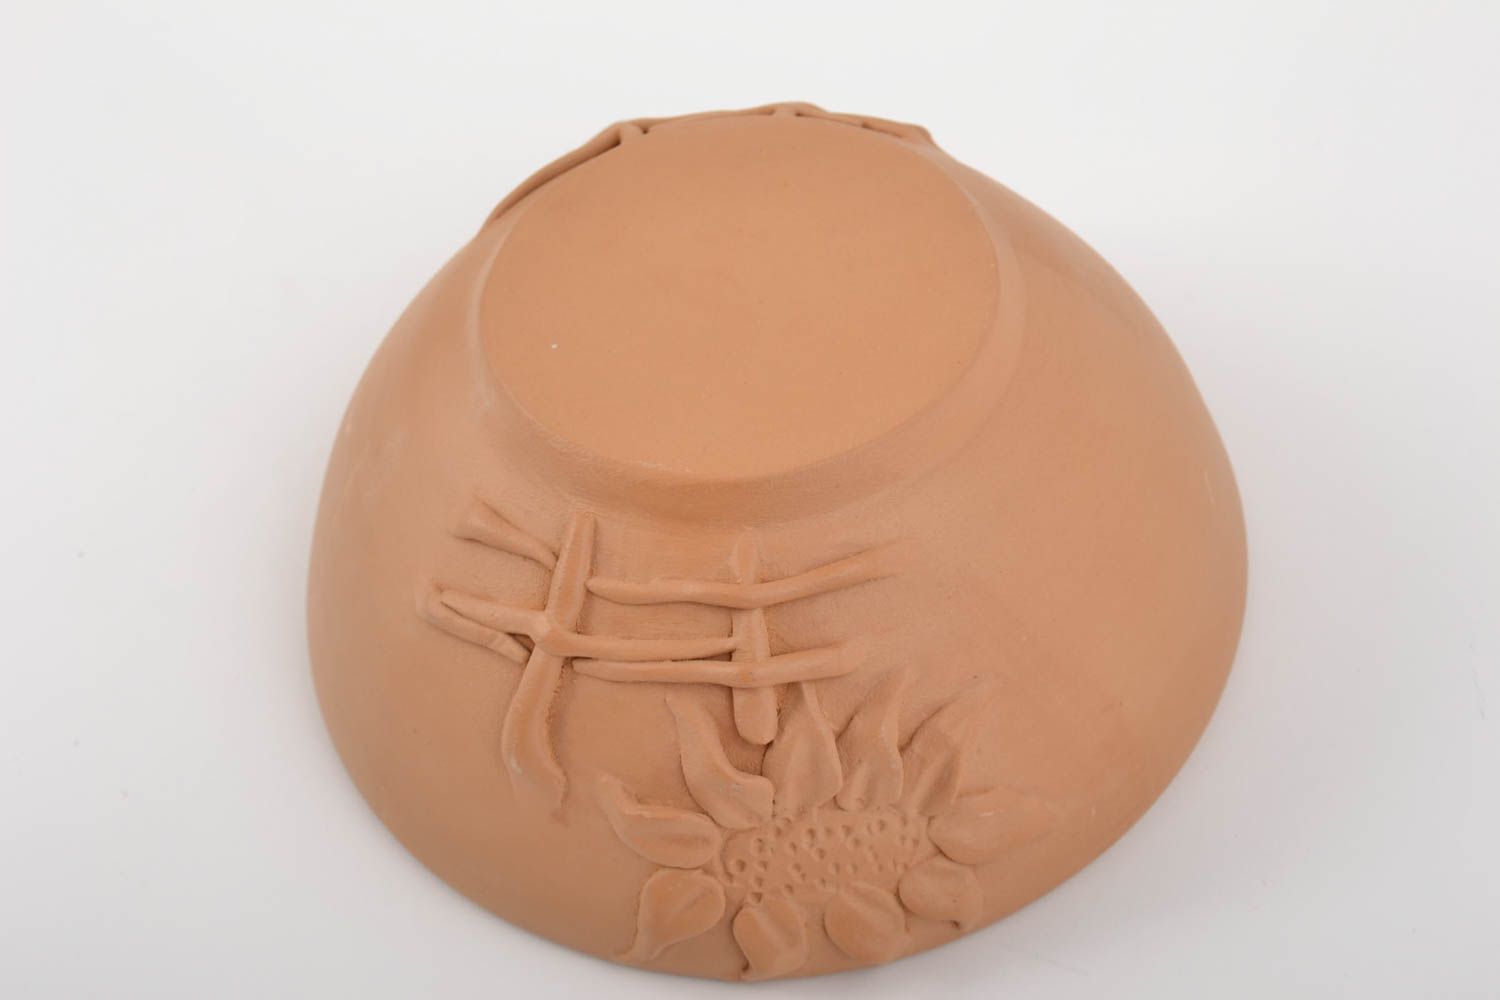 3-inch ceramic soup bowl with molded sunflower pattern in light terracotta color 1lb photo 3